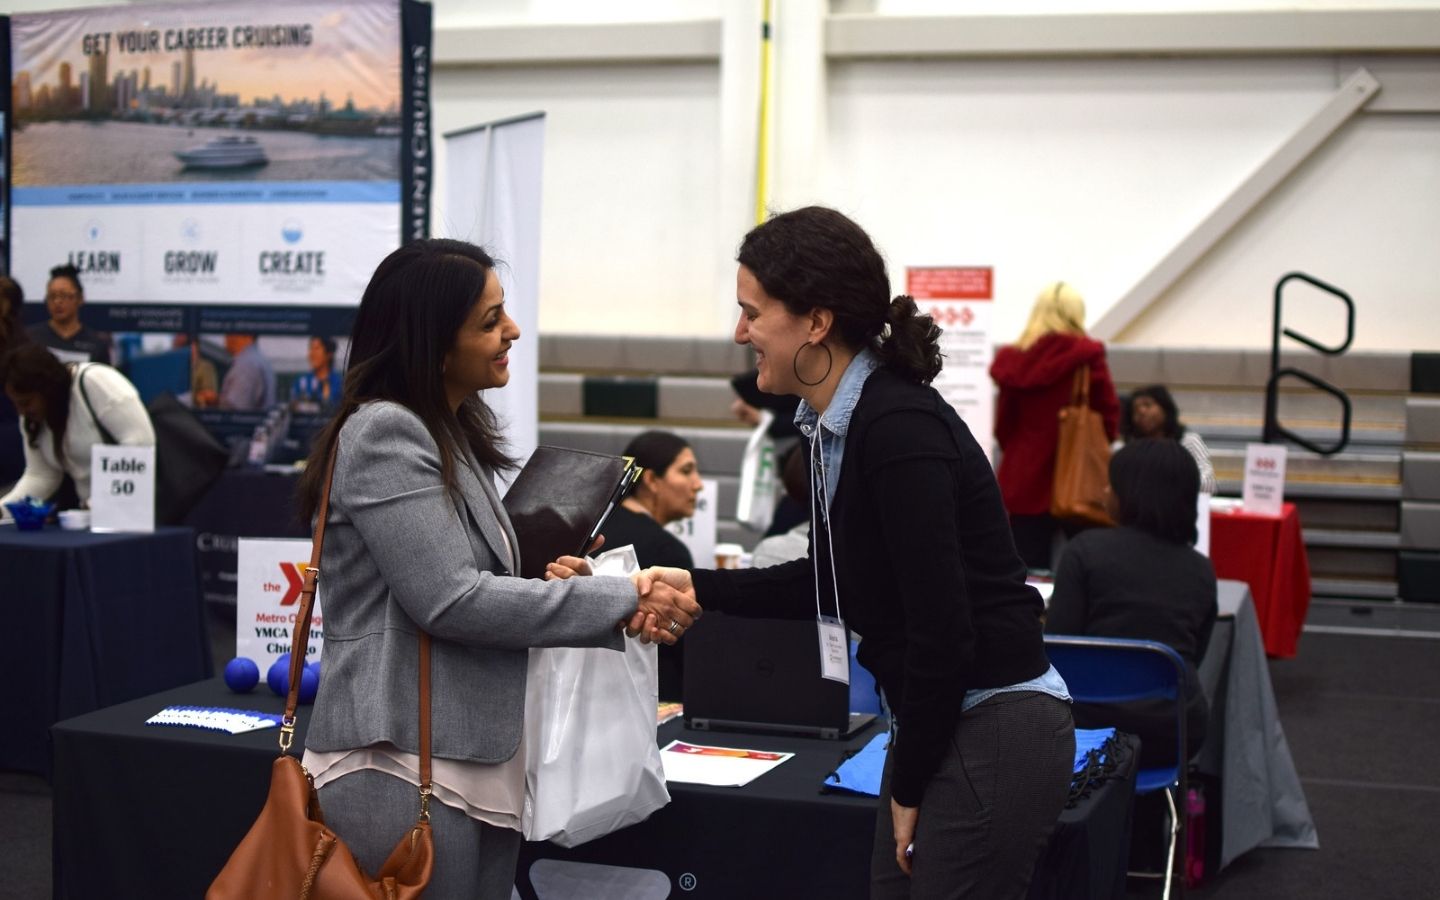 Females in business attire shaking hands at a networking event